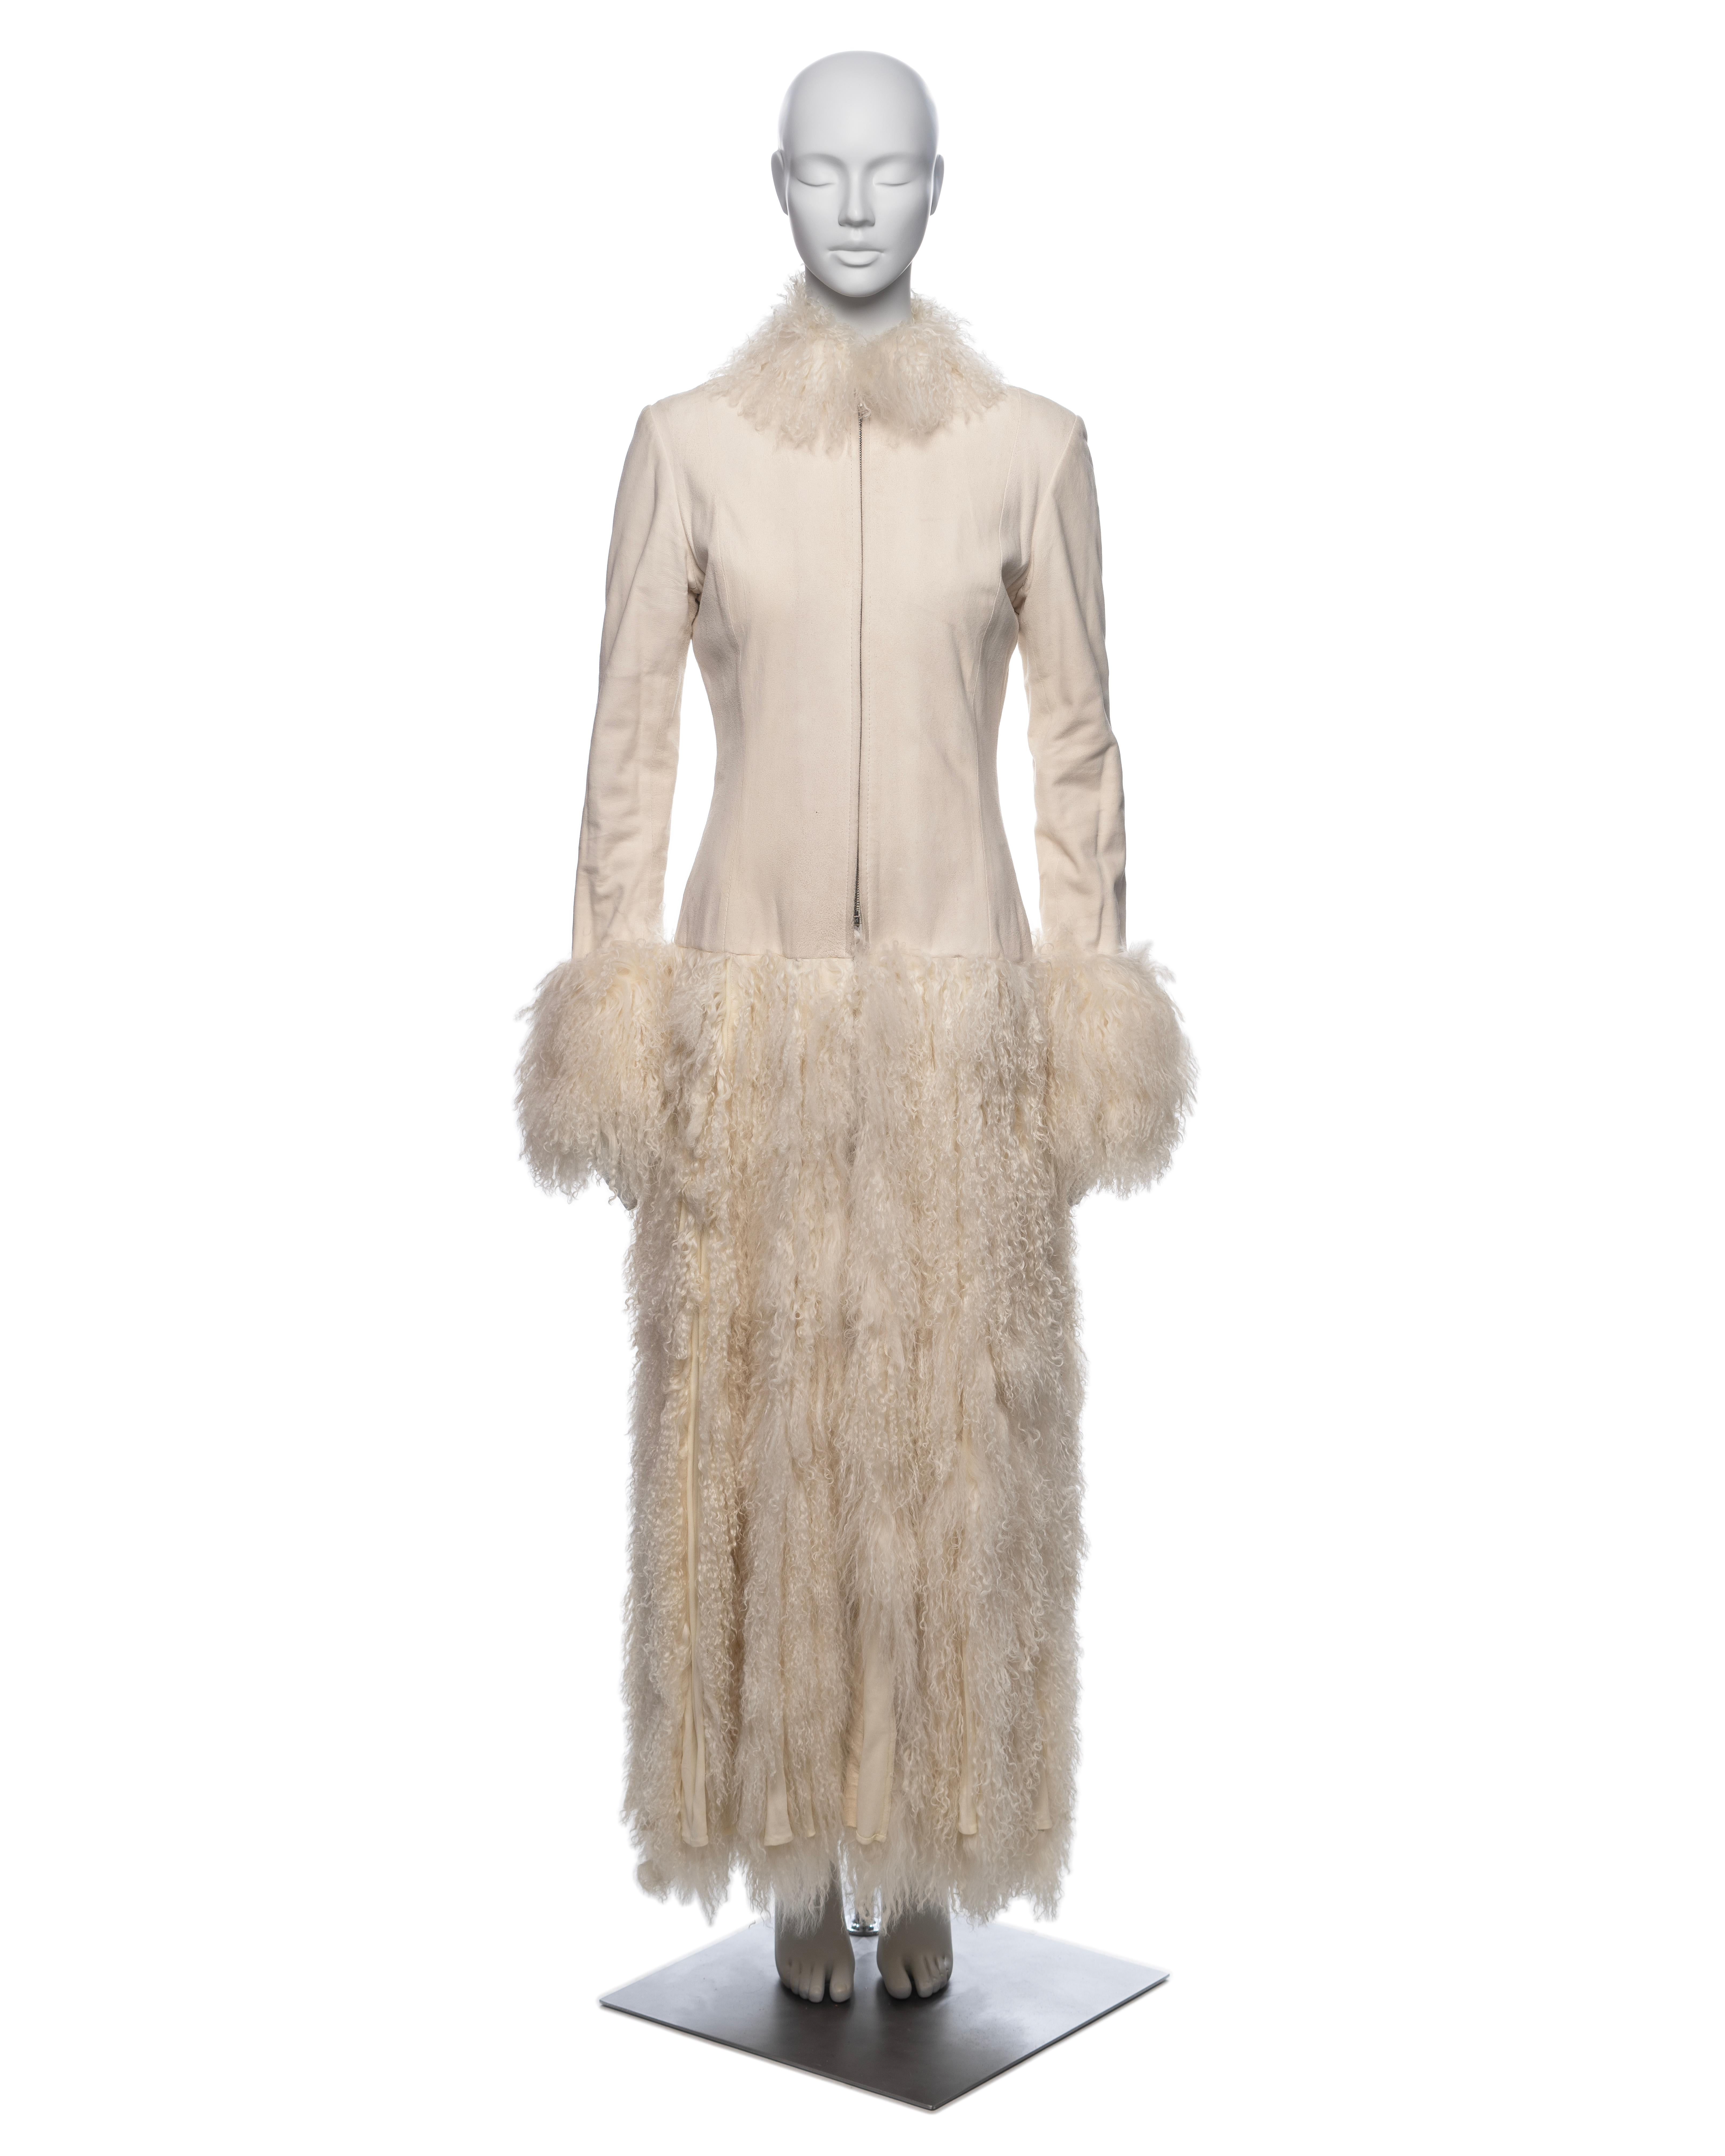 ▪ Brand: Jean Paul Gaultier
▪ Creative Director: Jean Paul Gaultier
▪ Collection: Fall-Winter 2006
▪ Fabric: Mongolian Lamb Fur, Antilope Leather
▪ Details: Features a fitted bodice with shearling lining and a zip-up closure, complemented by a maxi